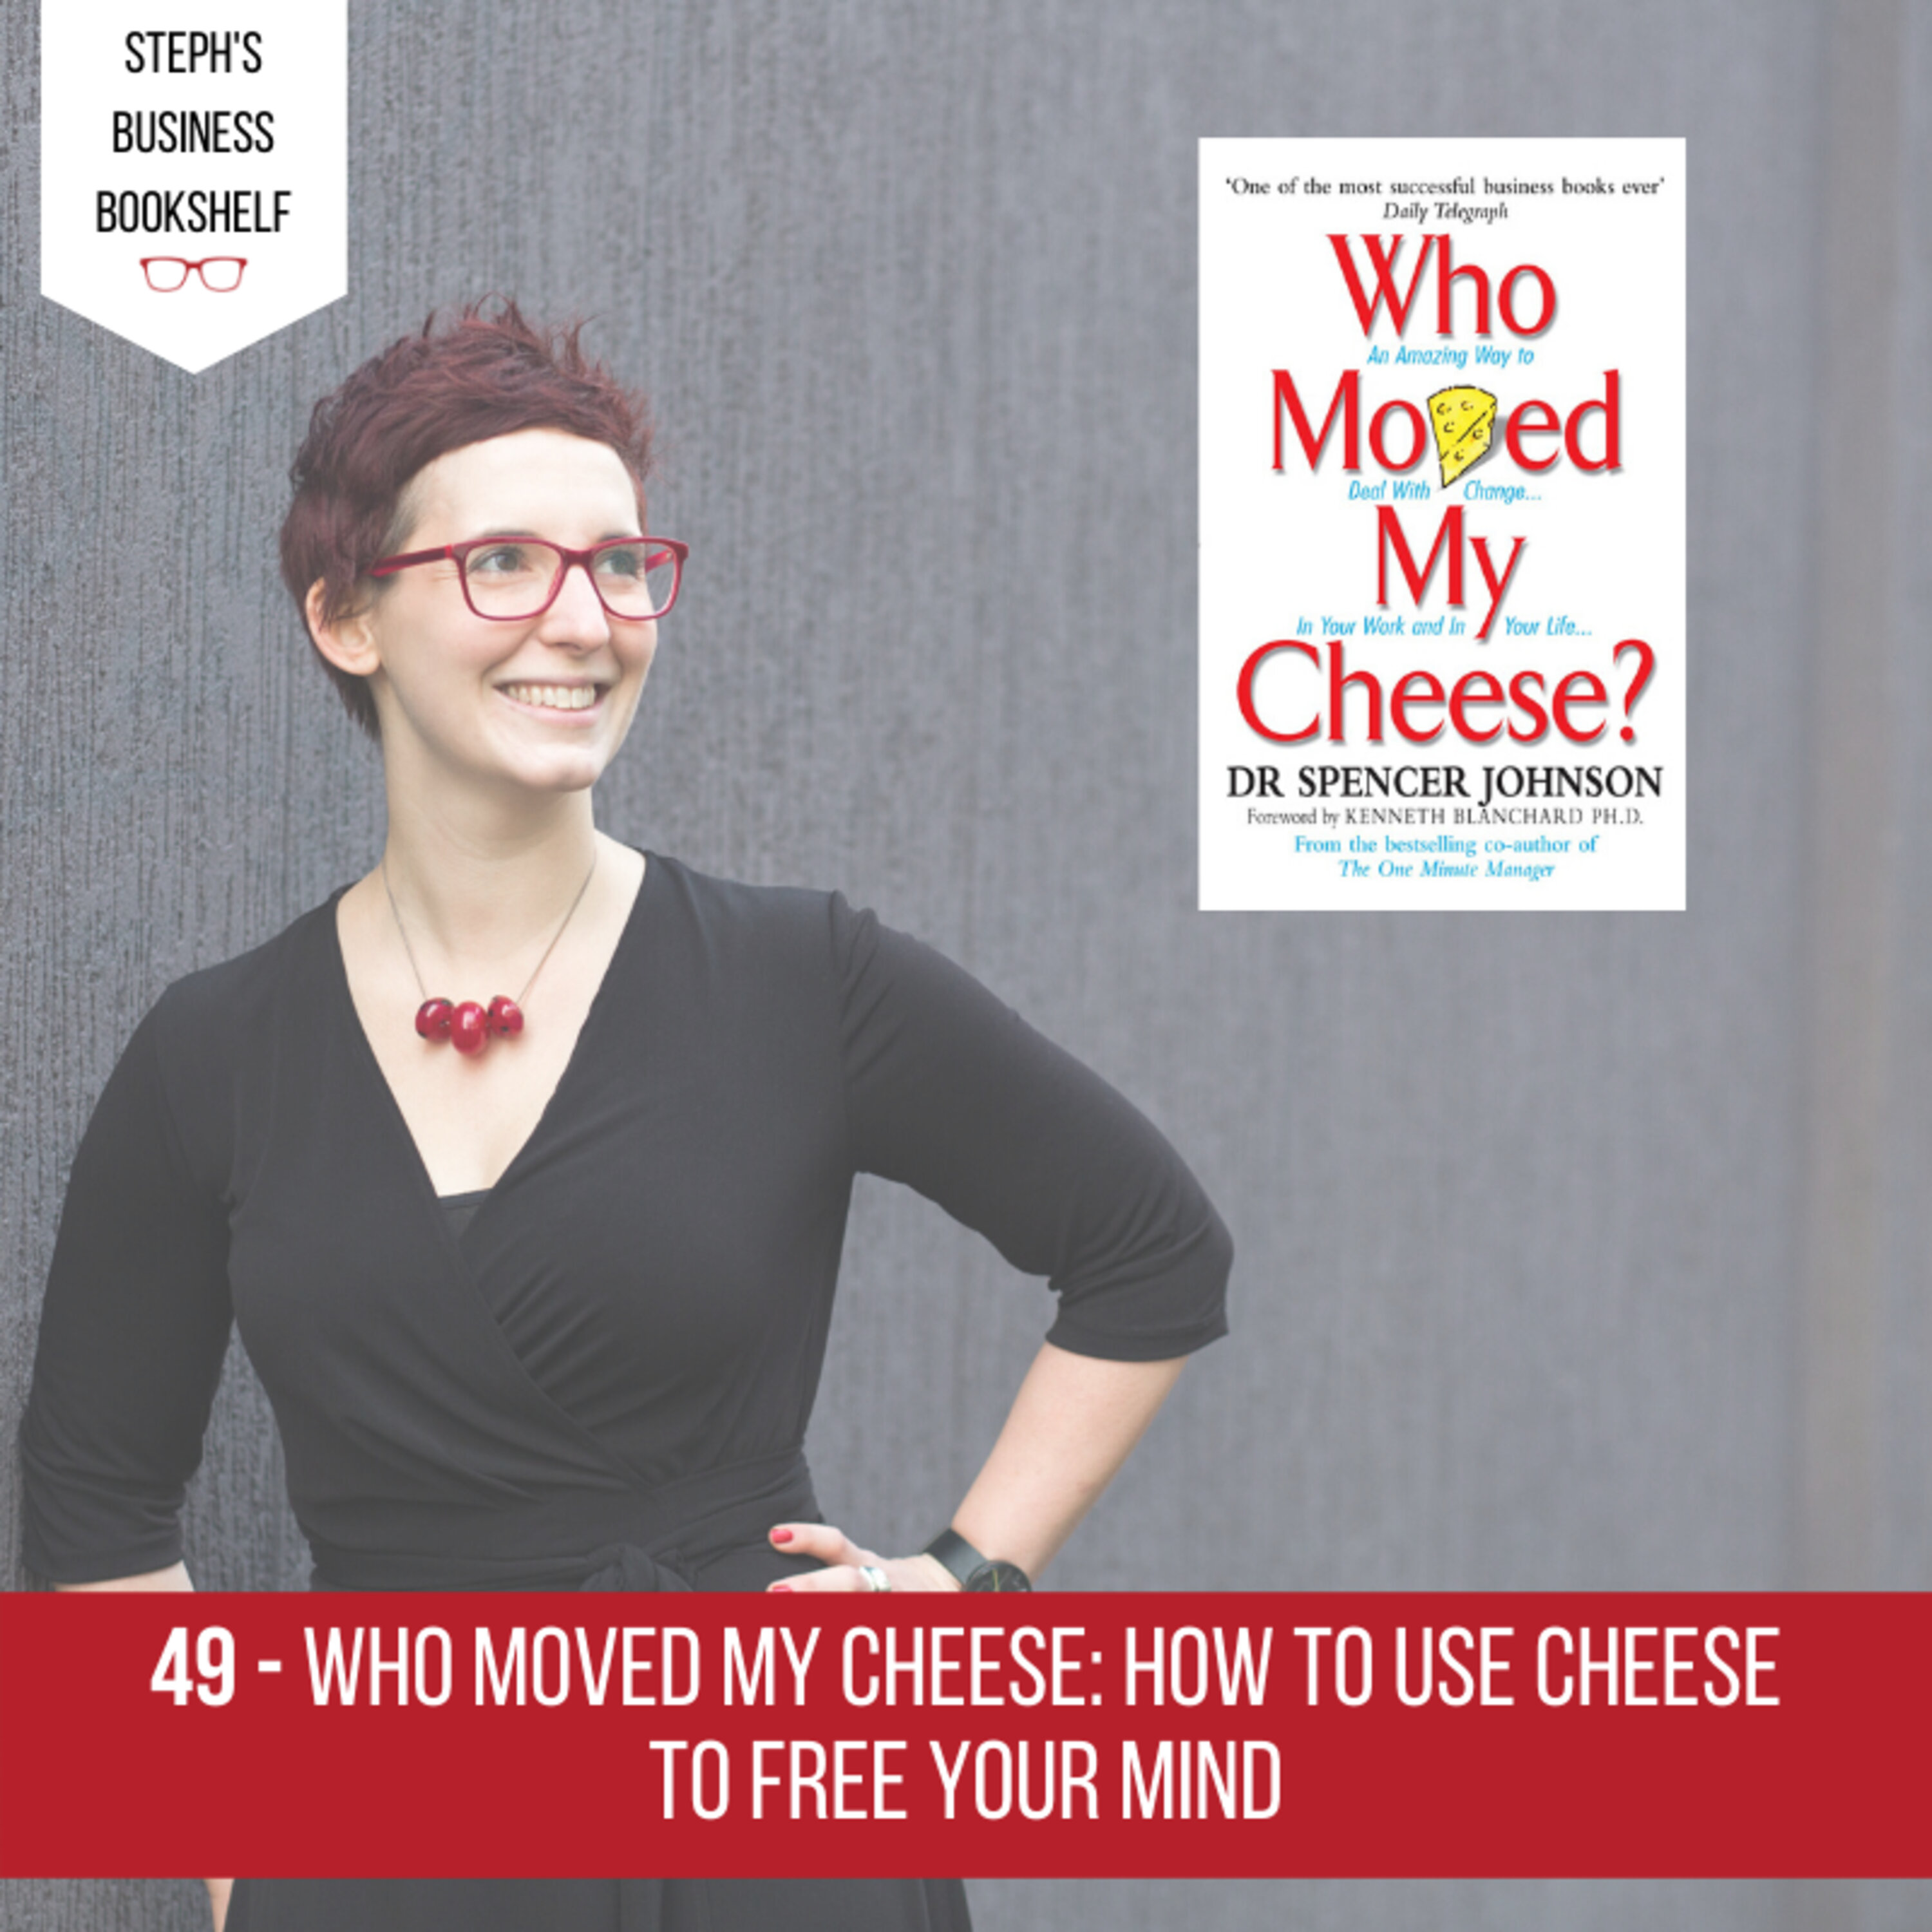 Who moved my cheese by Spencer Johnson: How To Use Cheese To Free Your Mind Image